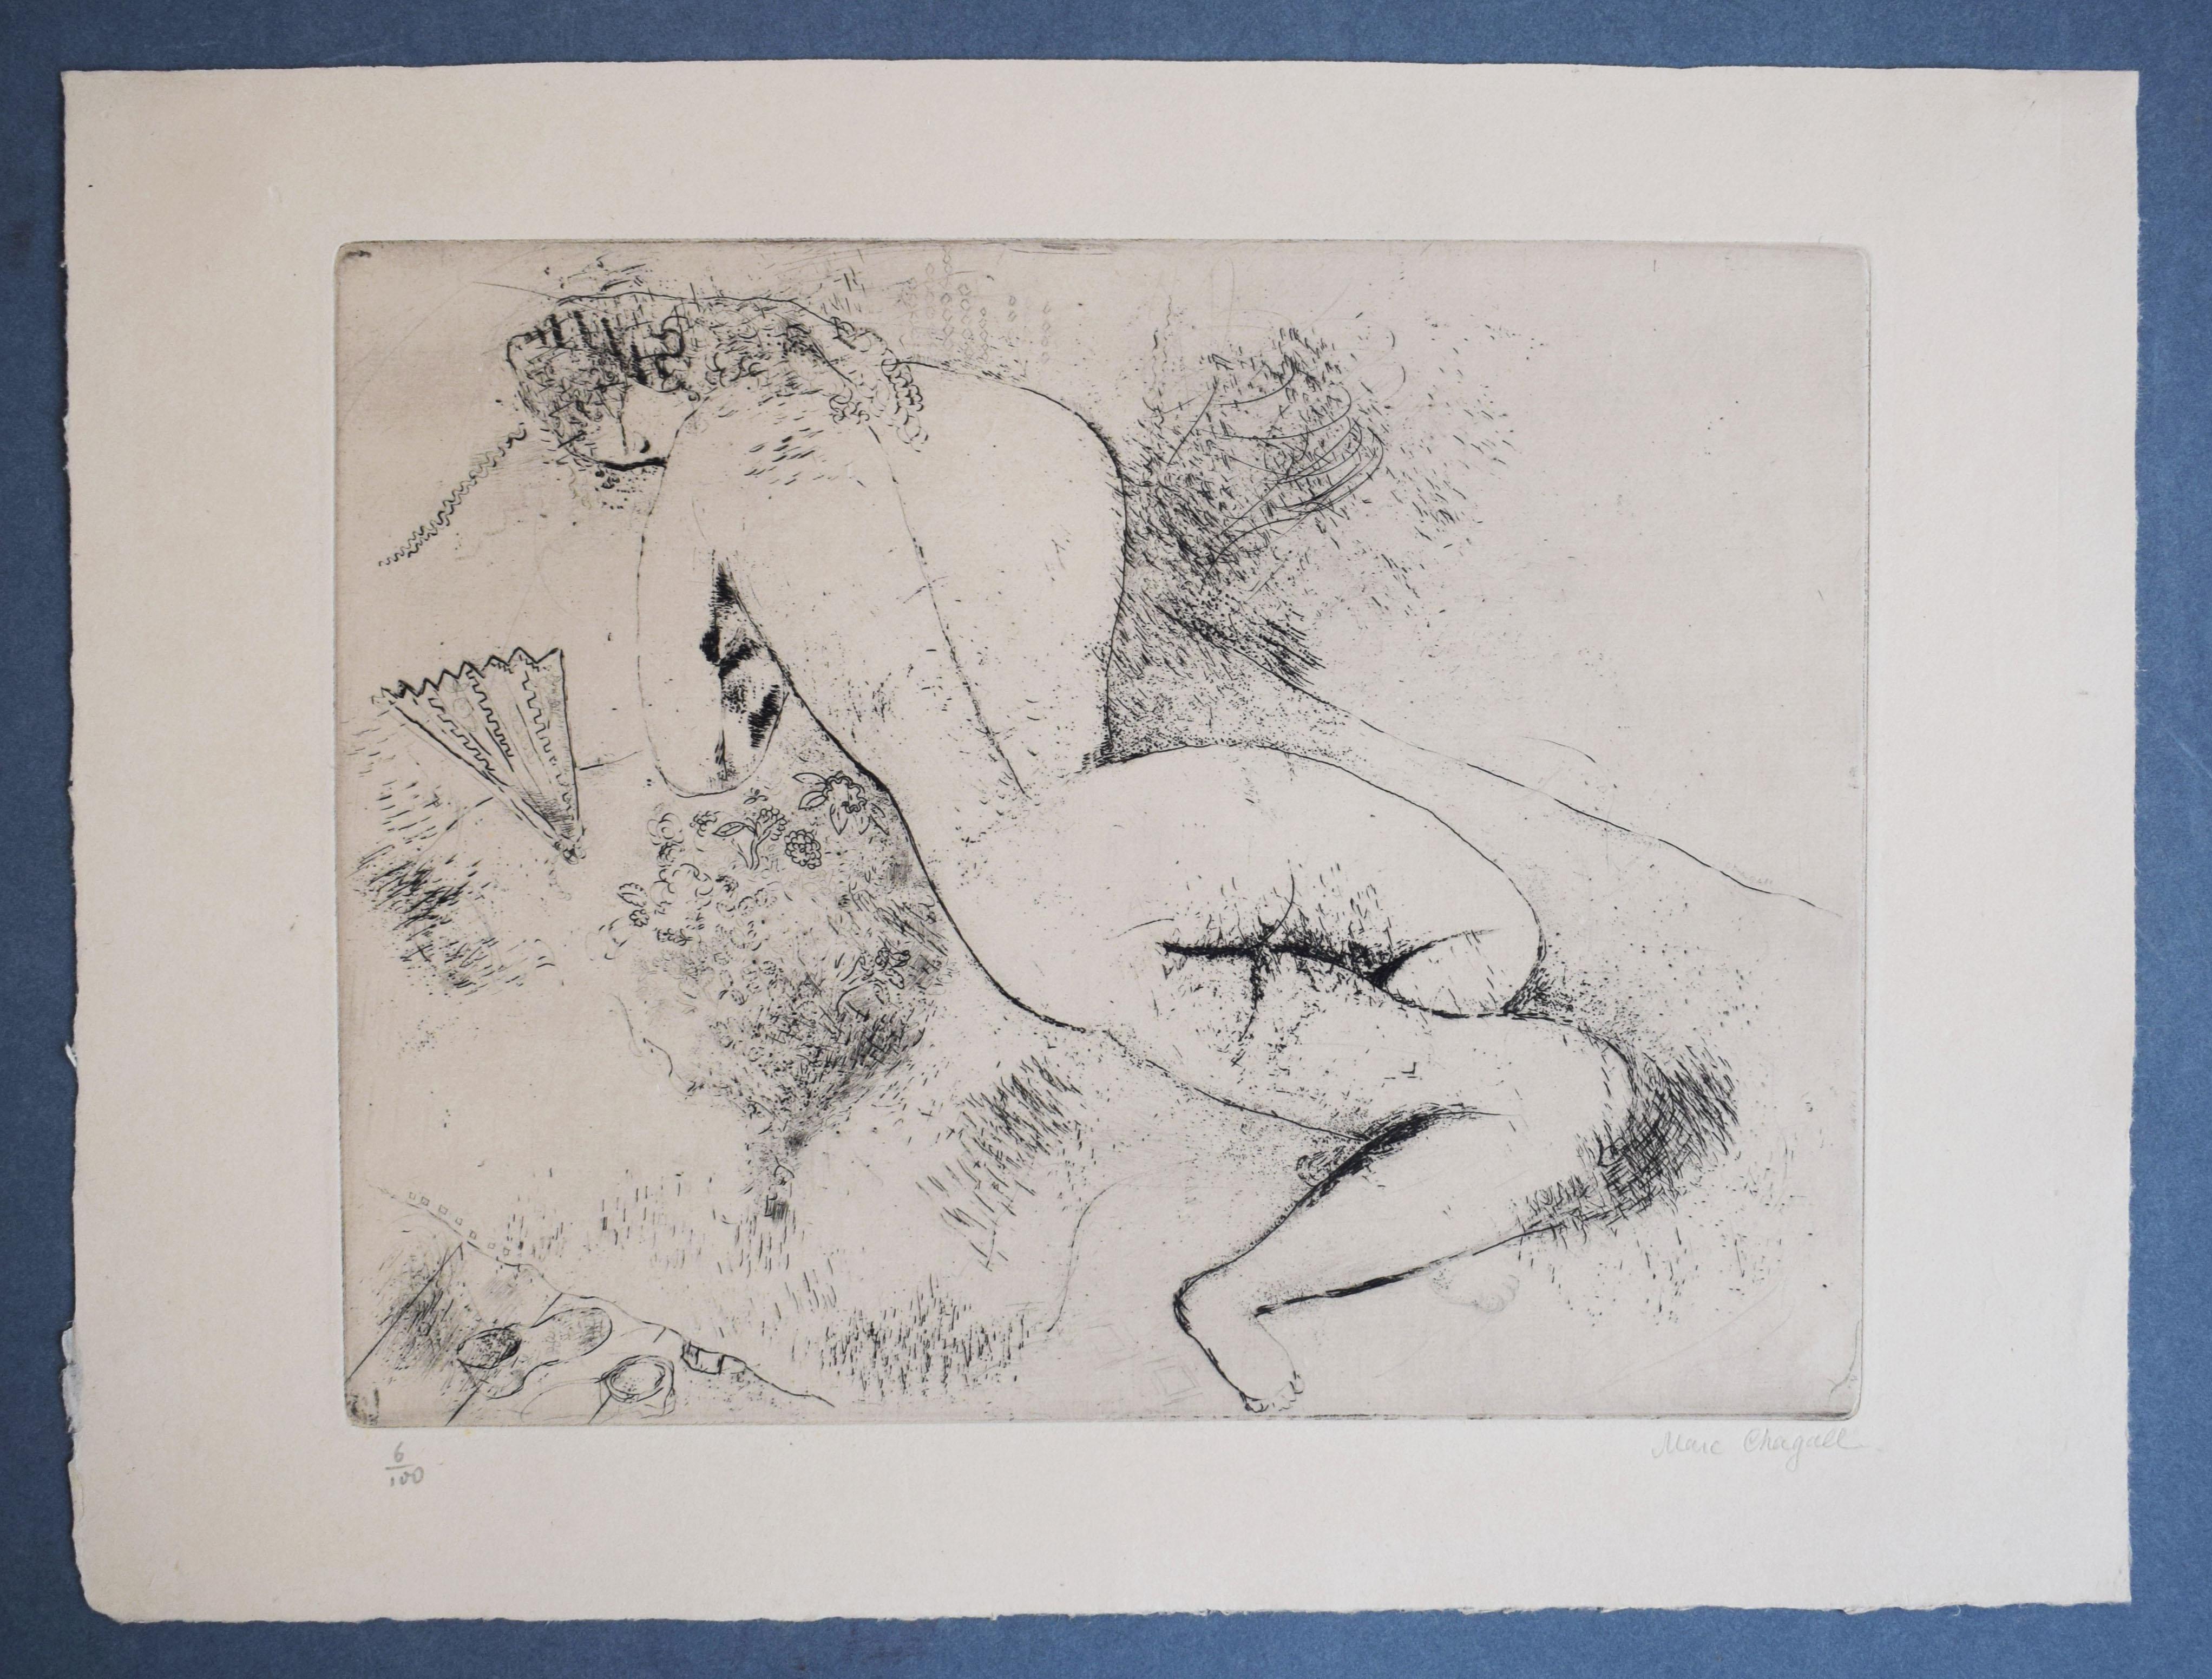 Nude with a Fan -  Female Nude with Fan French Russian Ecole de Paris - Print by Marc Chagall